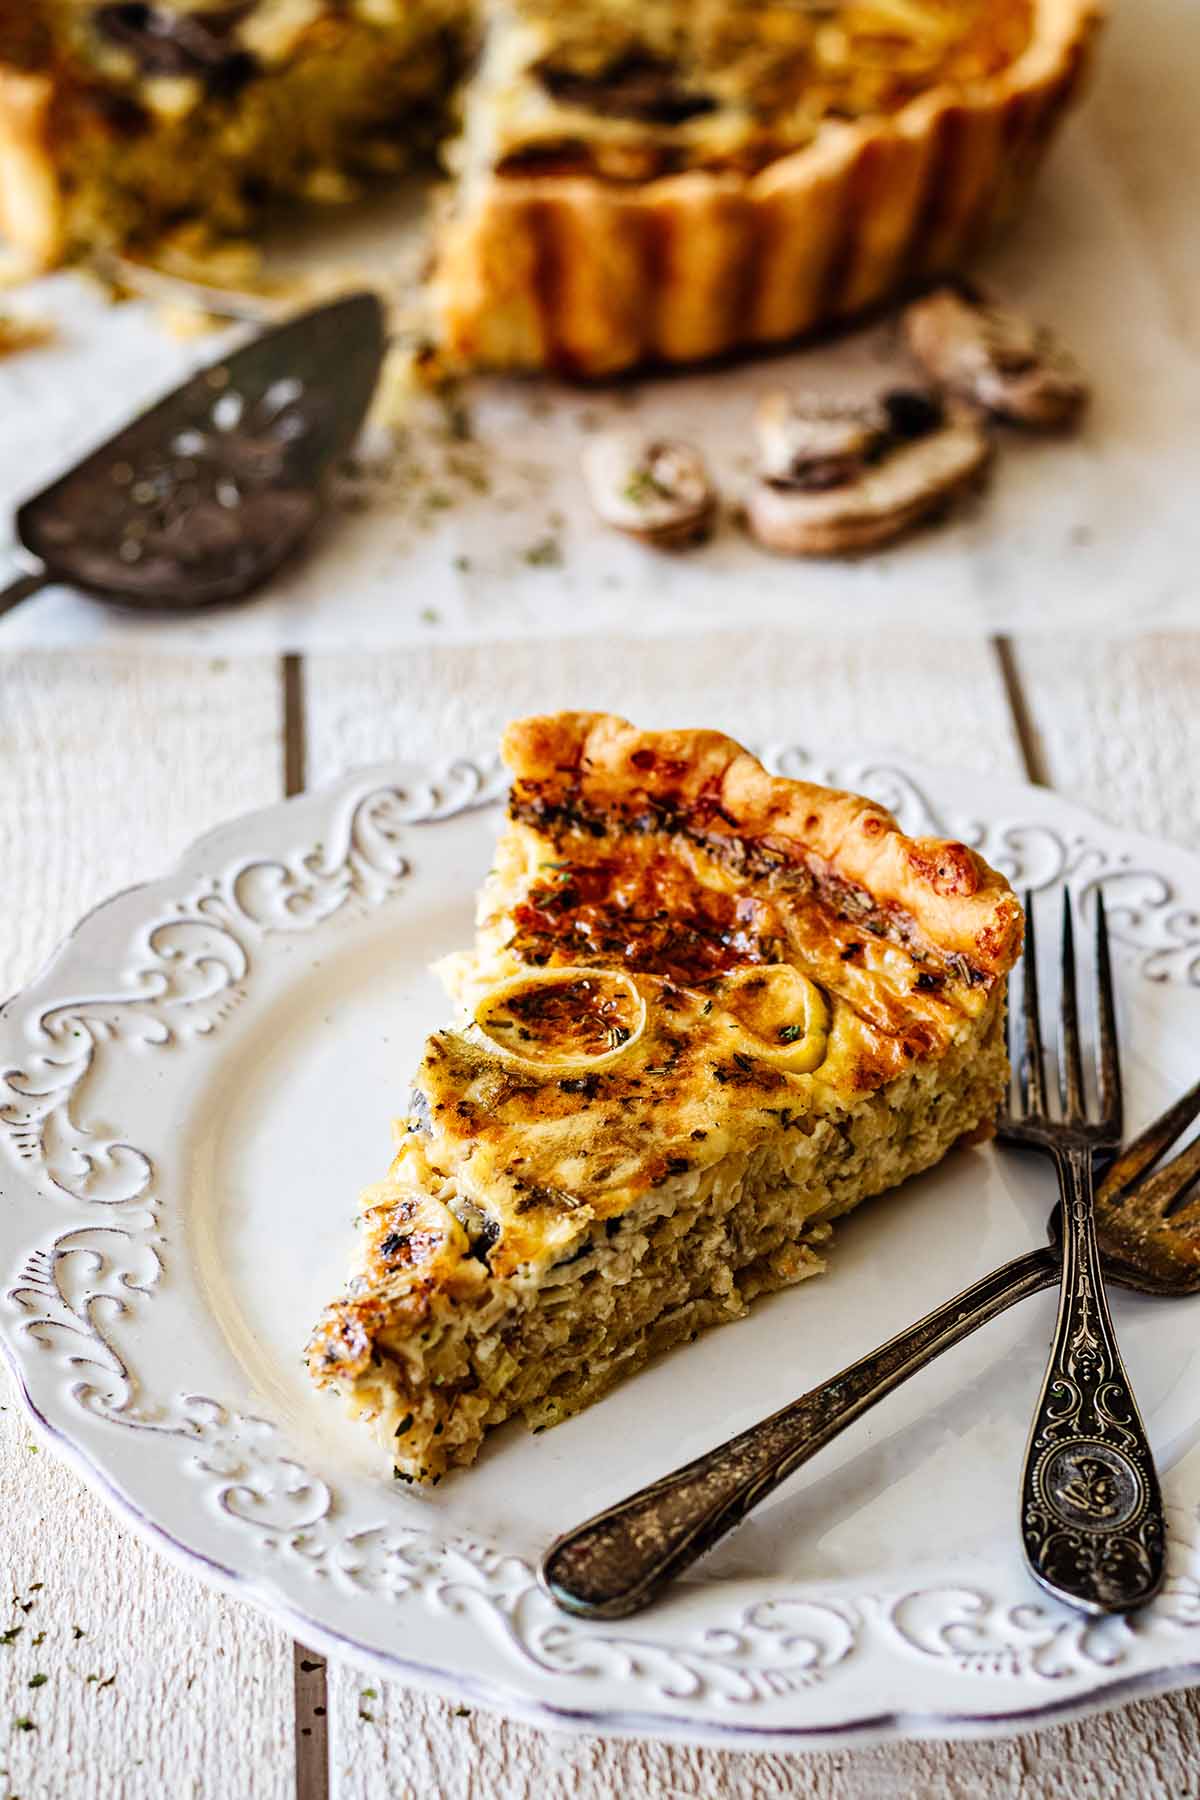 Slice of leek and mushroom quiche on a white plate with two forks. A whole quiche with a slice taken out is in the background.